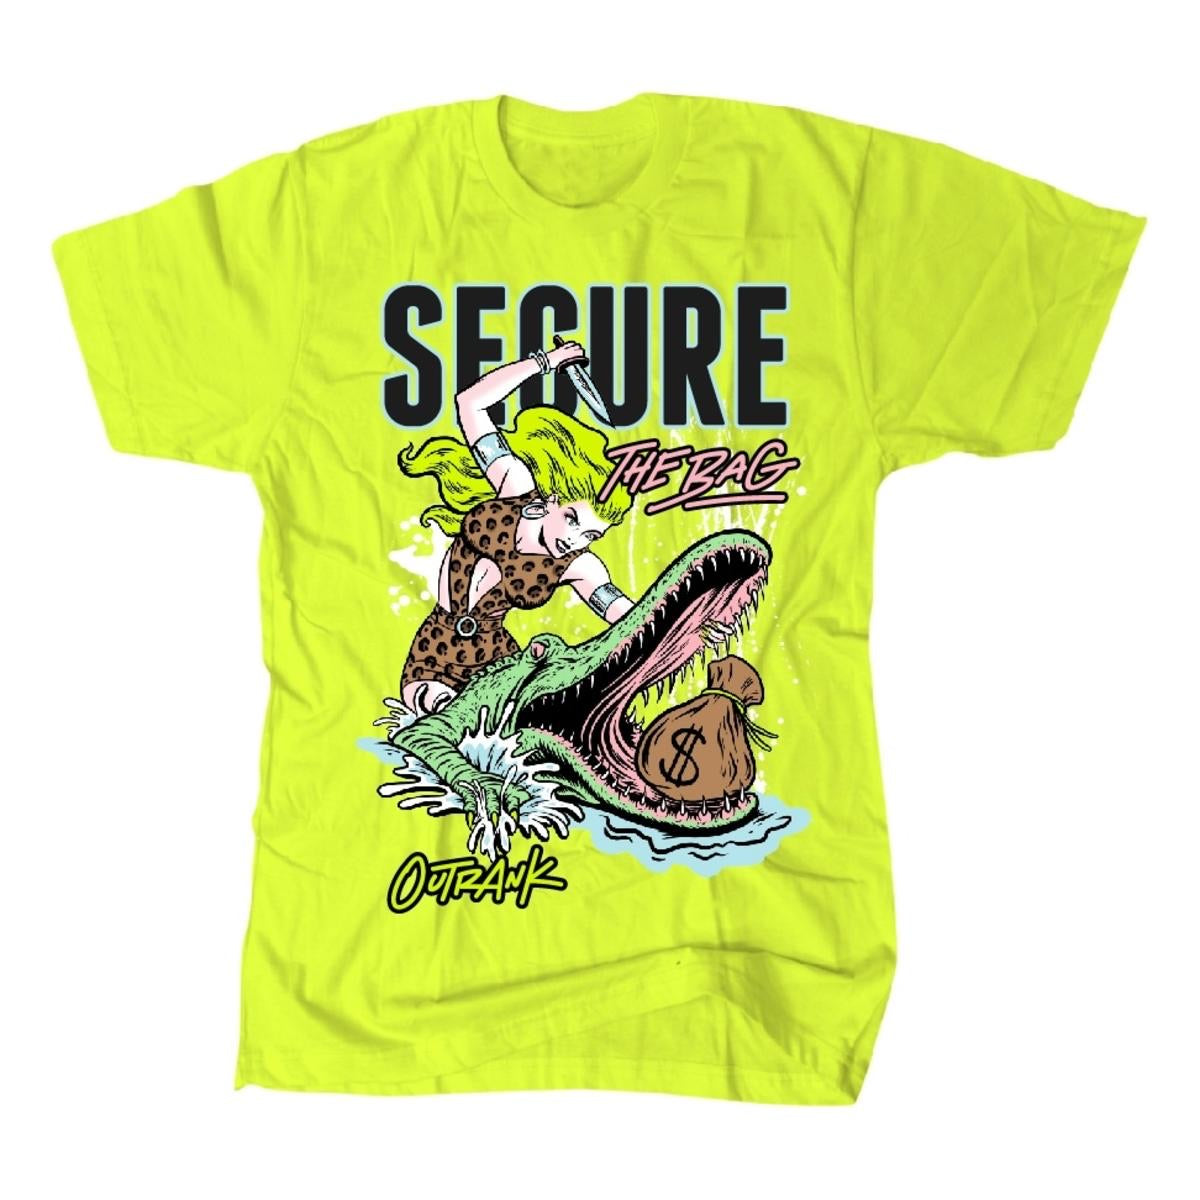 Outrank-Secure The Bag-Neon Yellow-OR1131